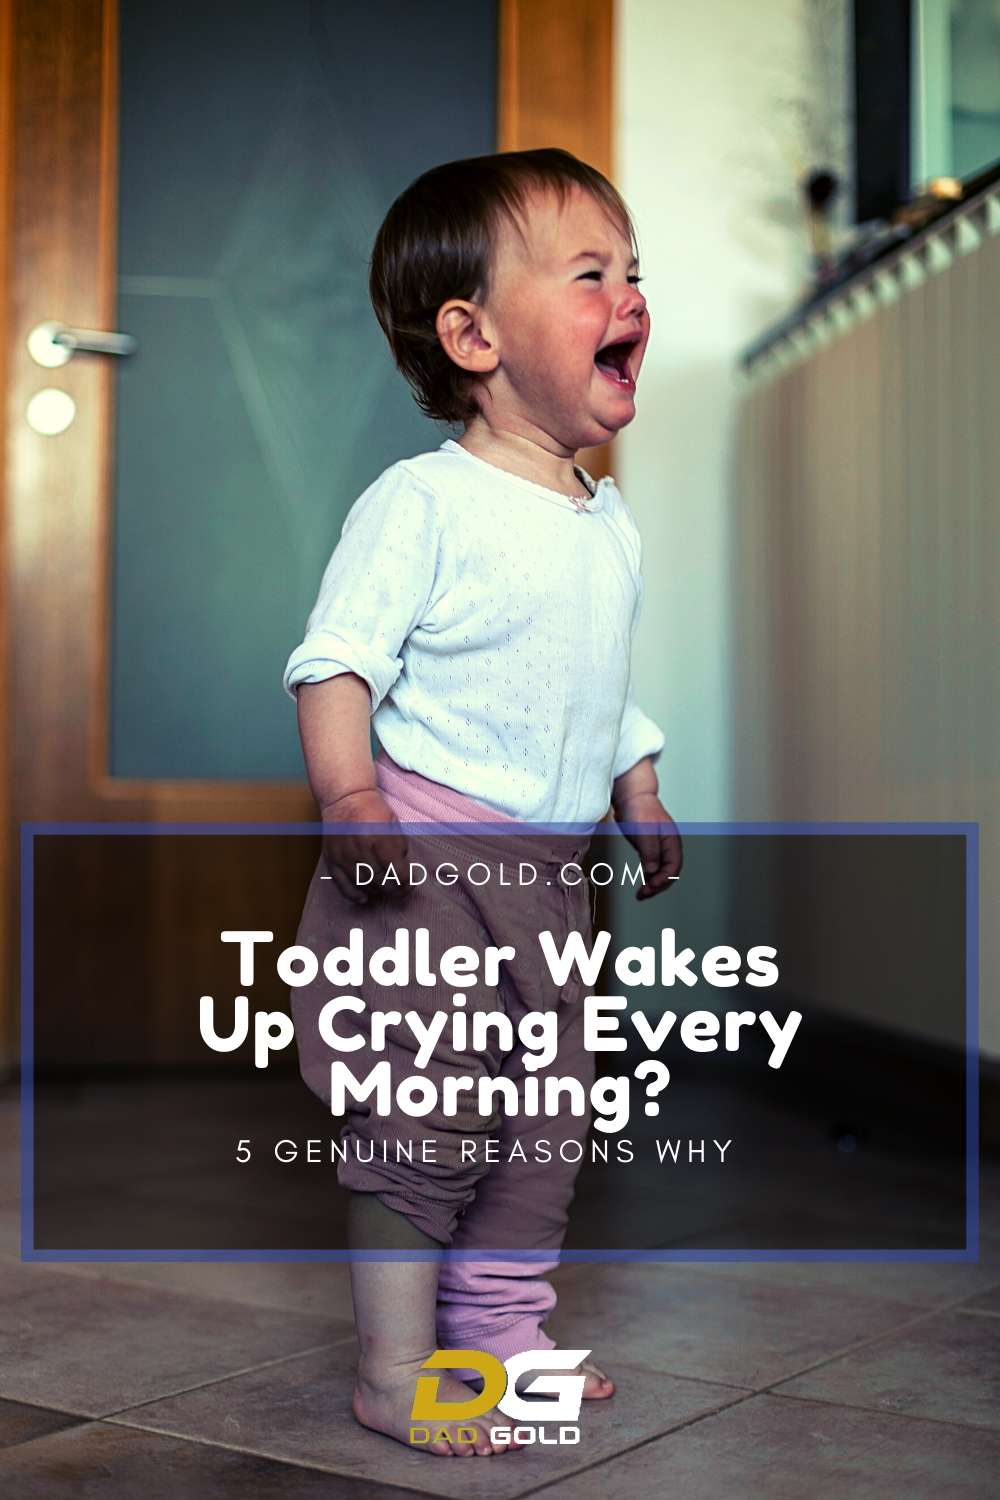 5 Genuine Reasons Why Your Toddler Wakes Up Crying Every Morning